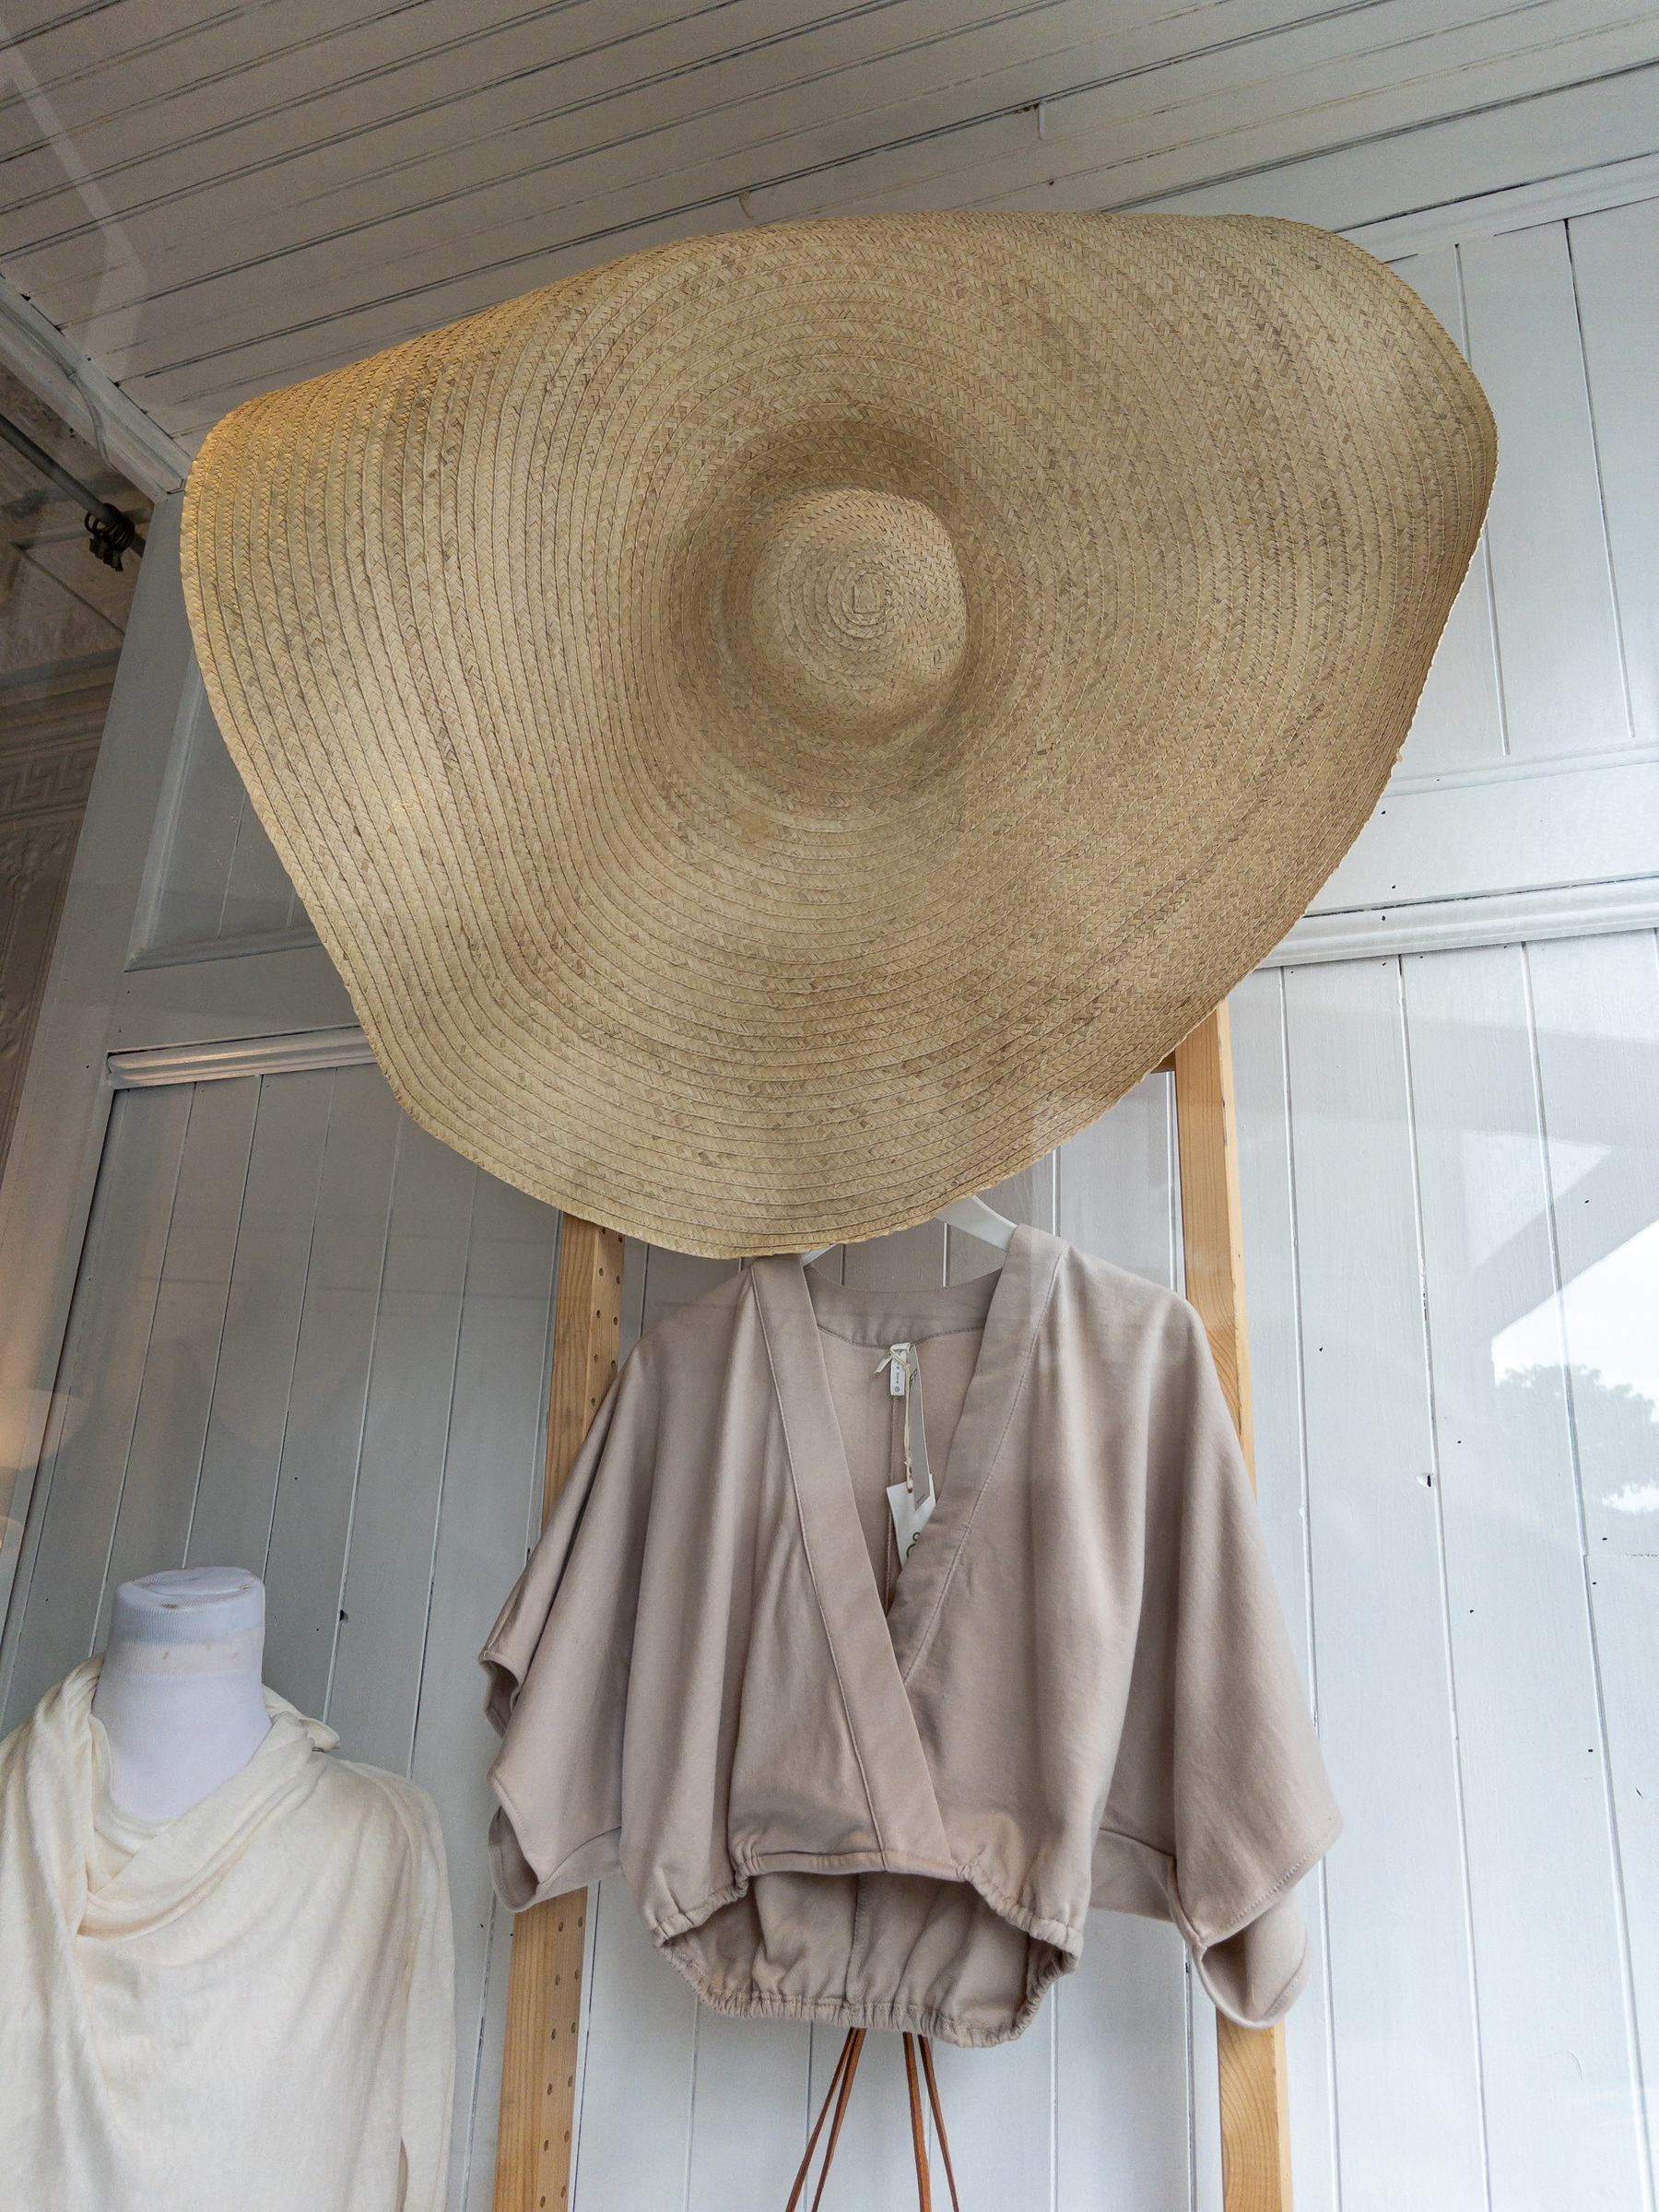 Huge brimmed woven hat hanging on wall above woman’s blouse also hanging on wall.